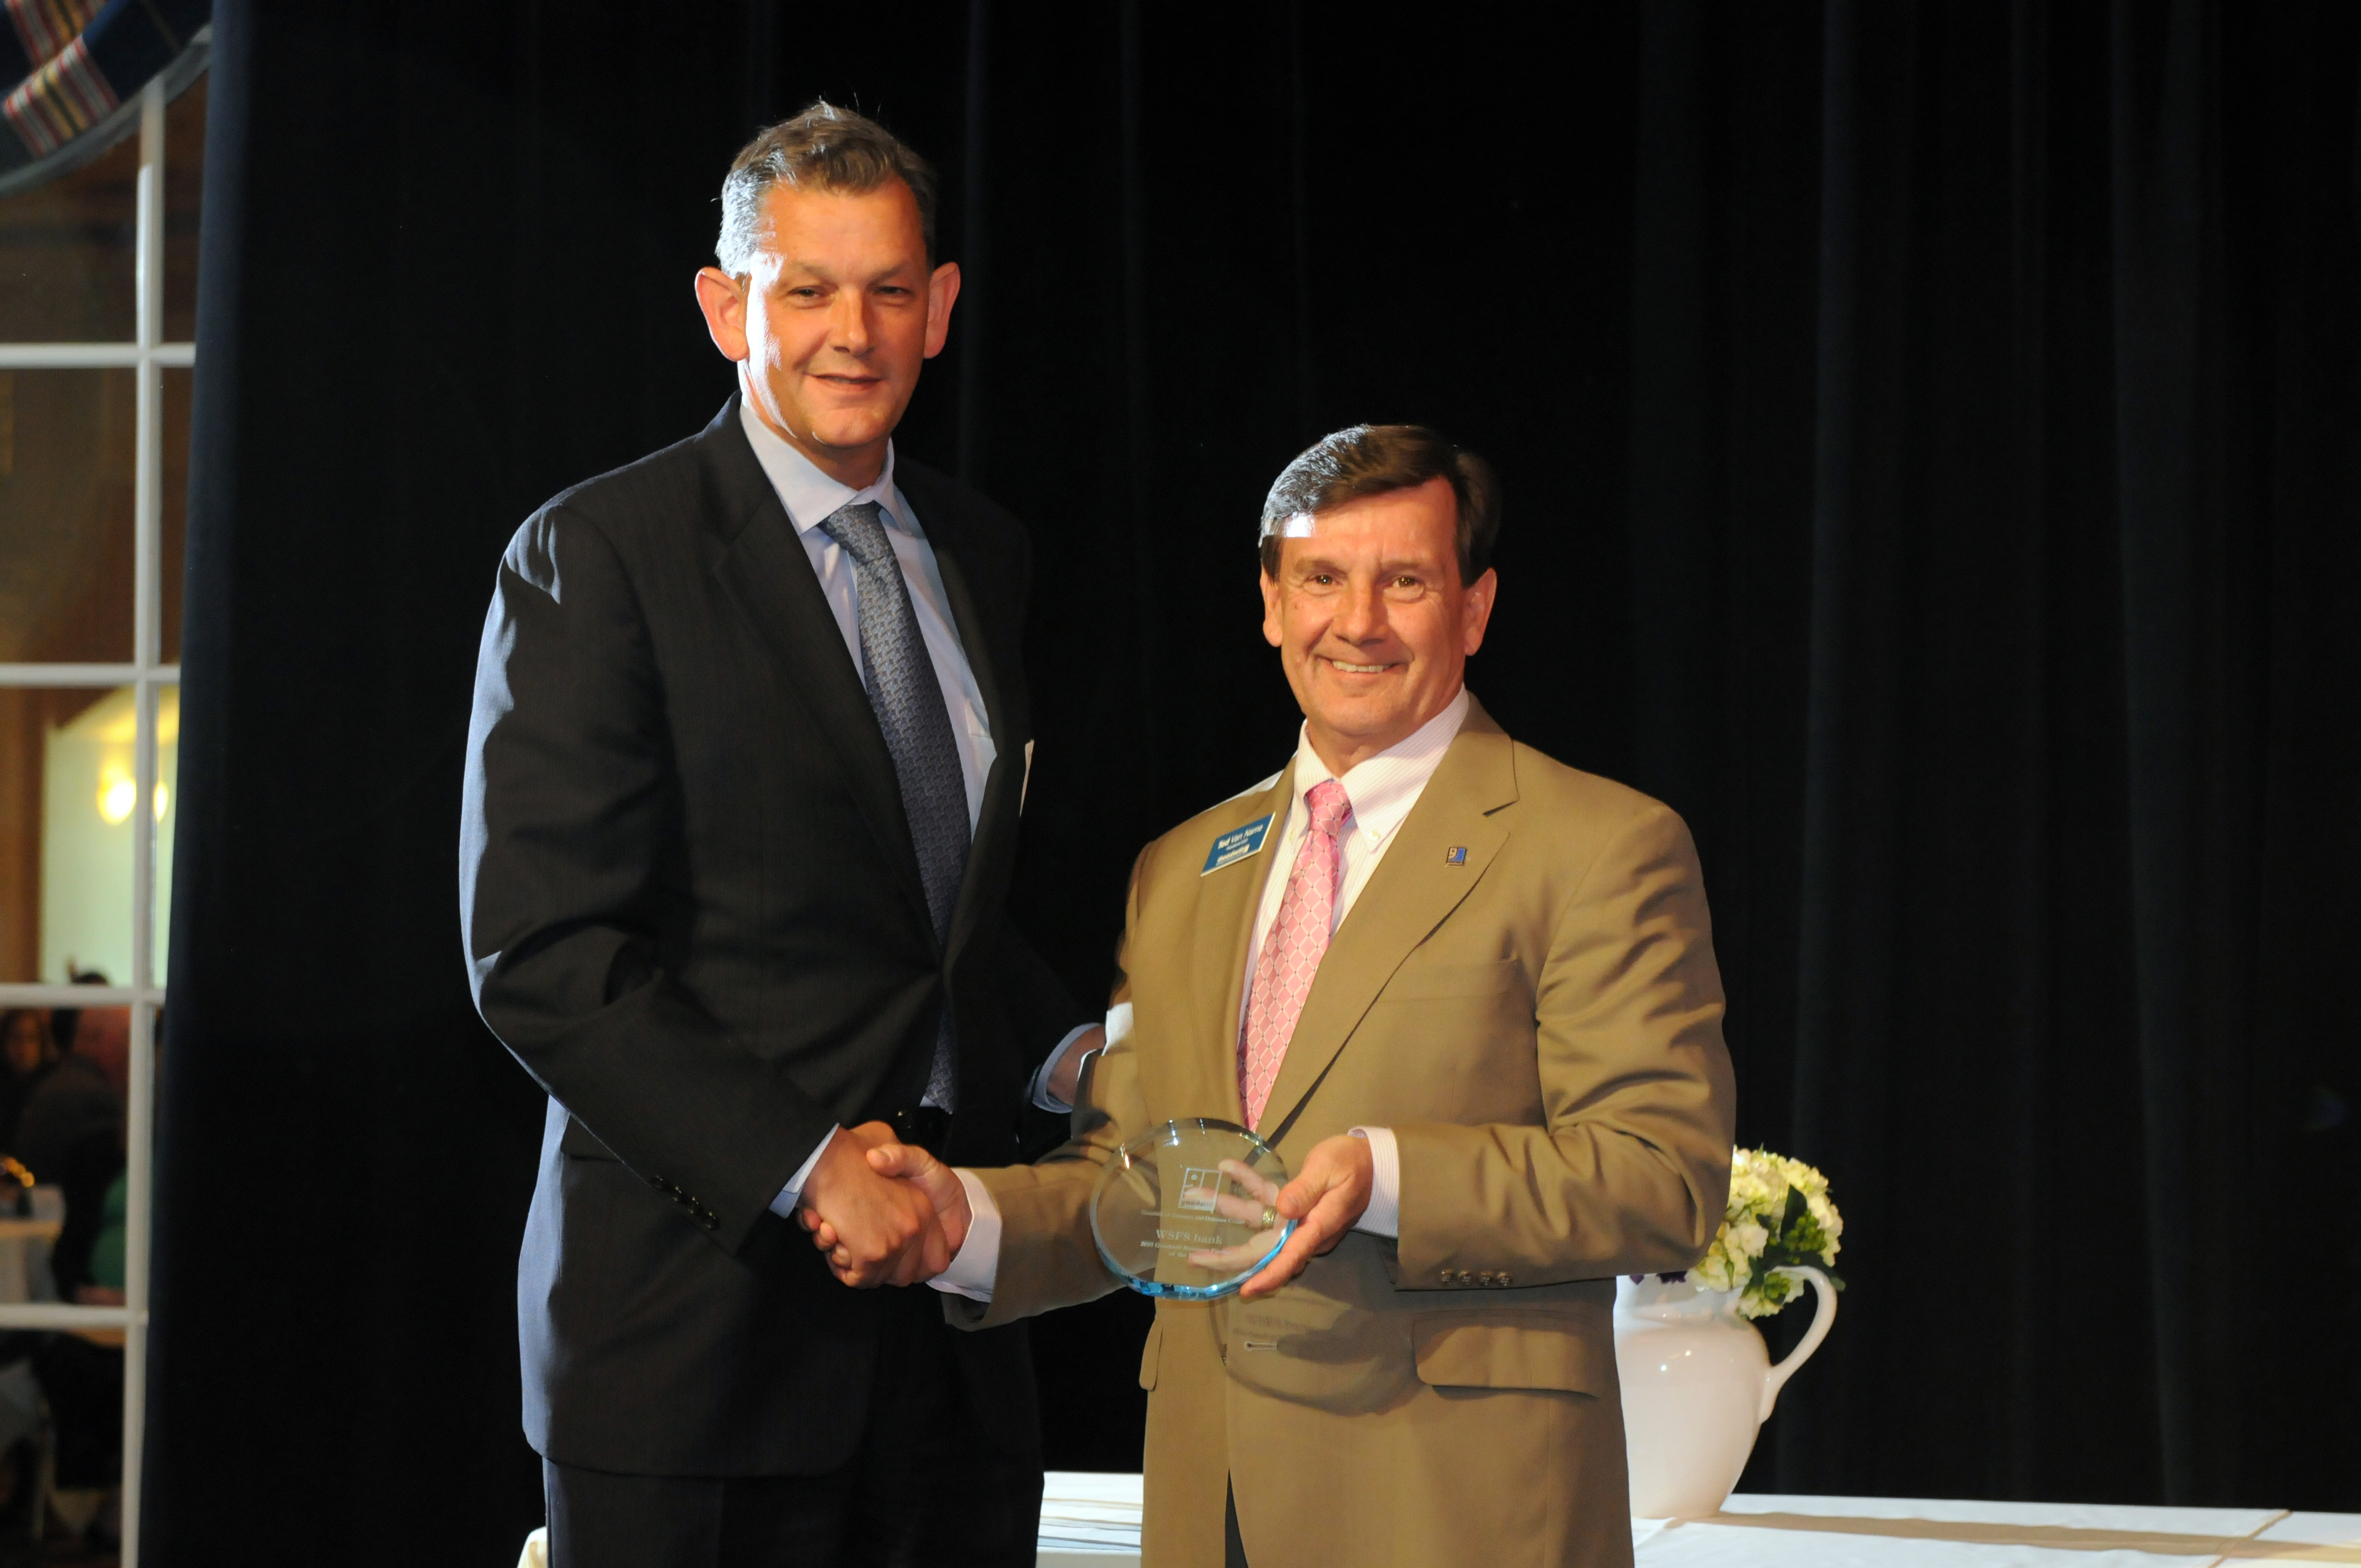 2011 Goodwill Business Partner of the Year Award